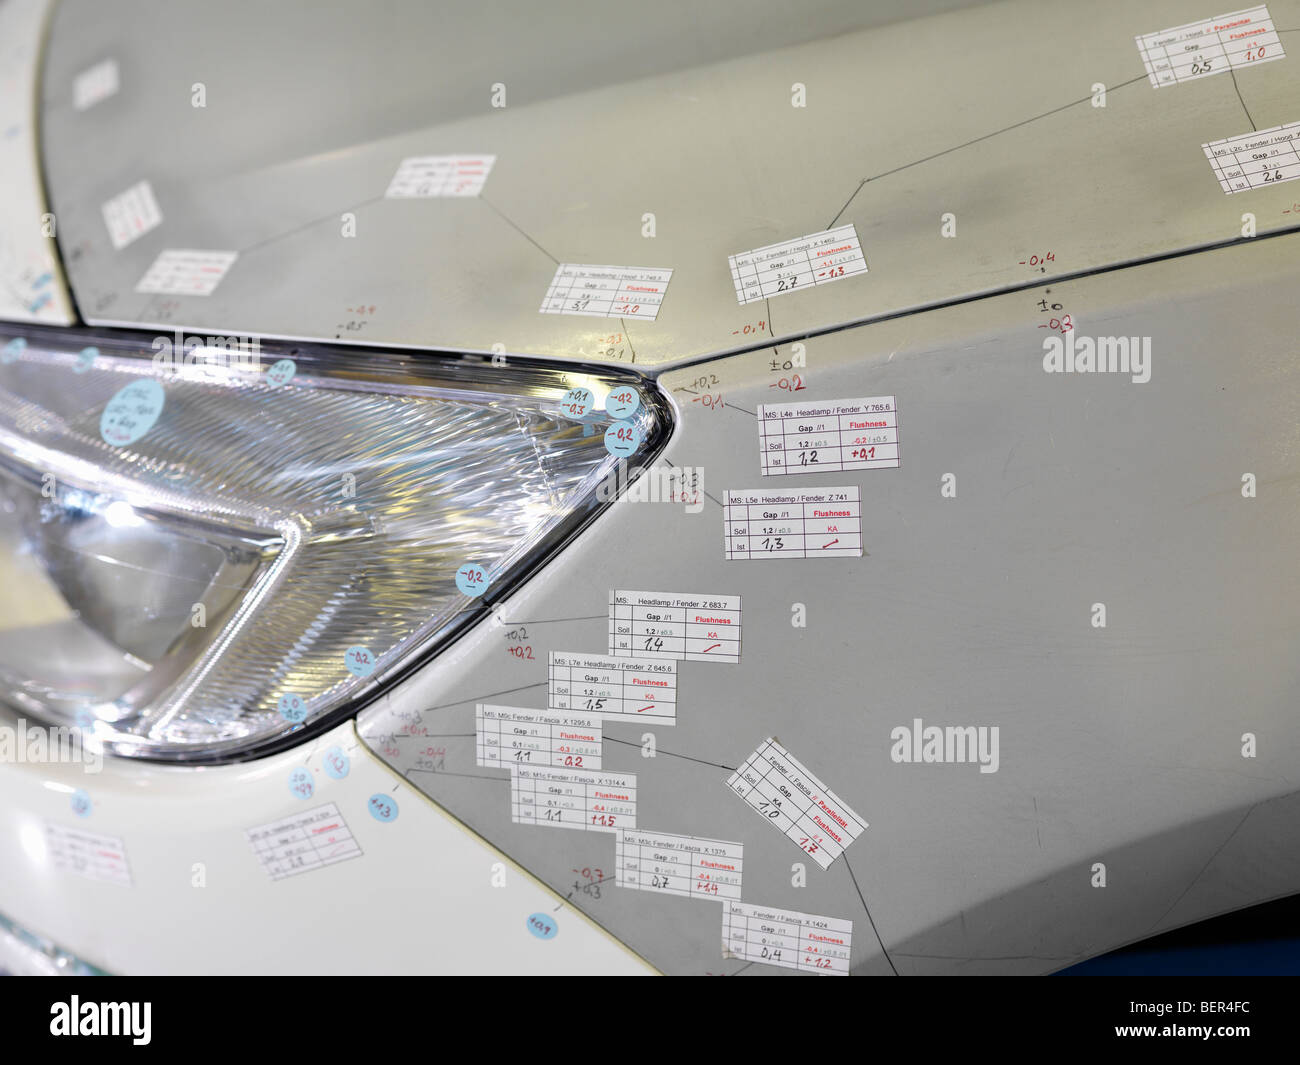 Car Headlight And Stickers In Factory Stock Photo